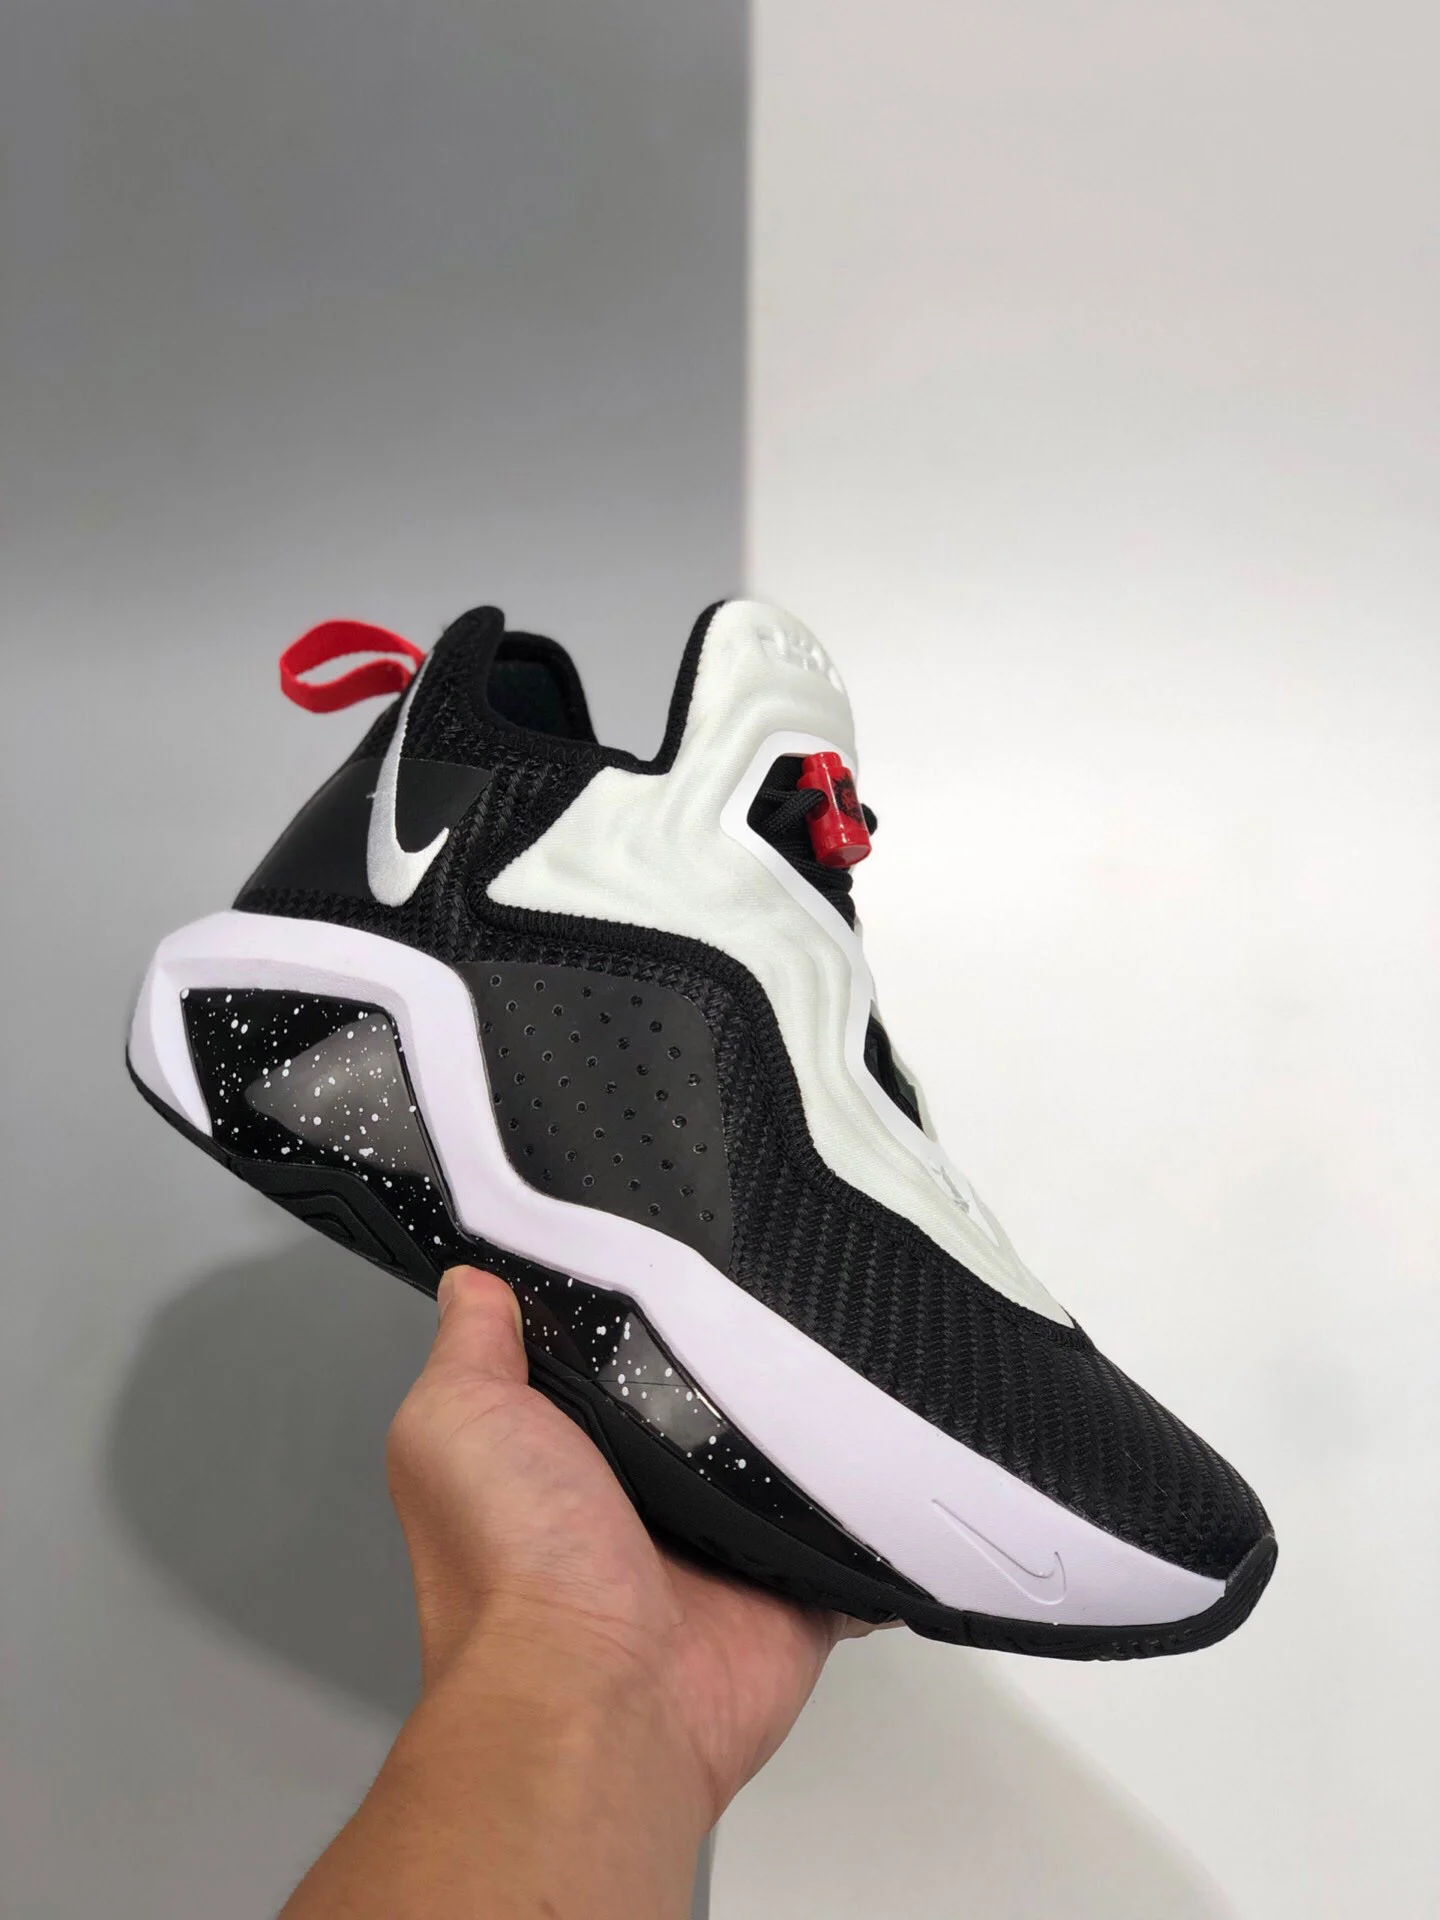 Nike LeBron Soldier 14 Black White-University Red For Sale